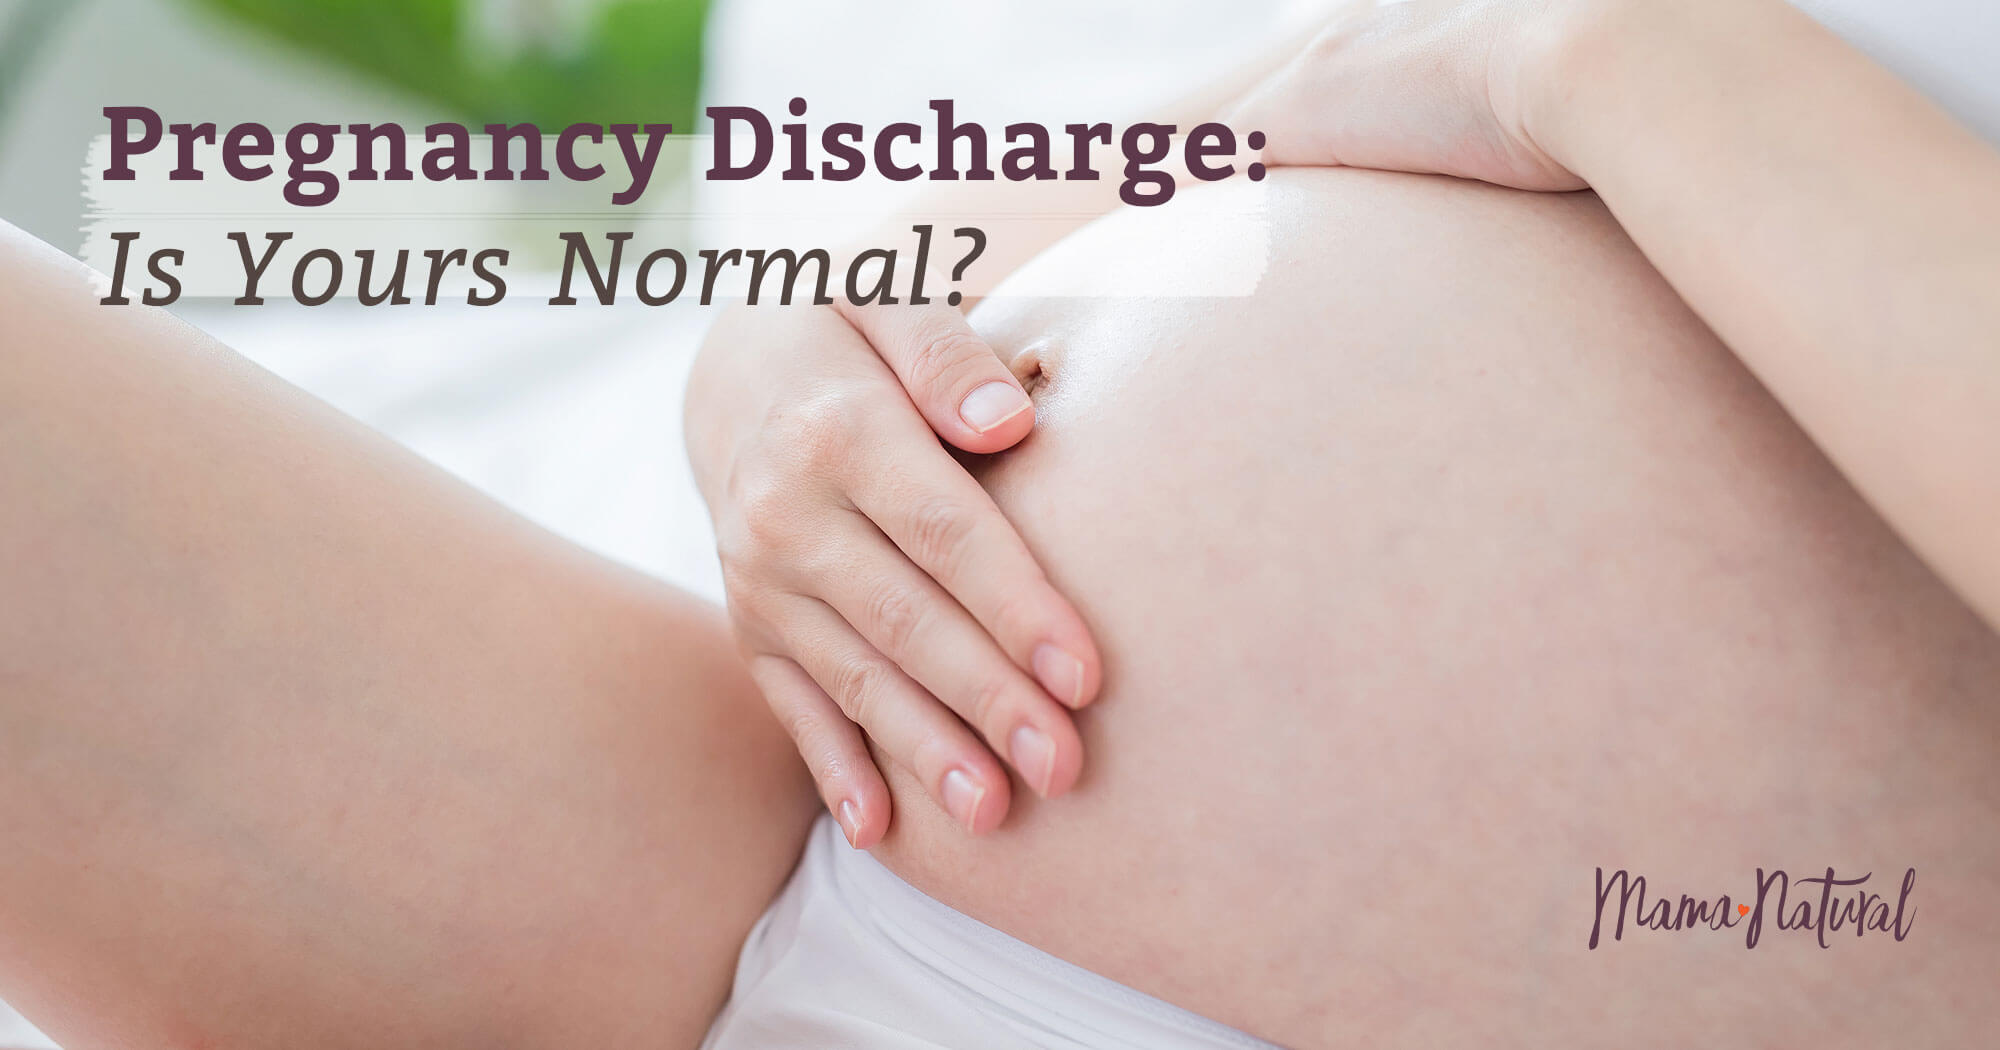 Pregnancy Discharge: Is What You're Experiencing Normal?